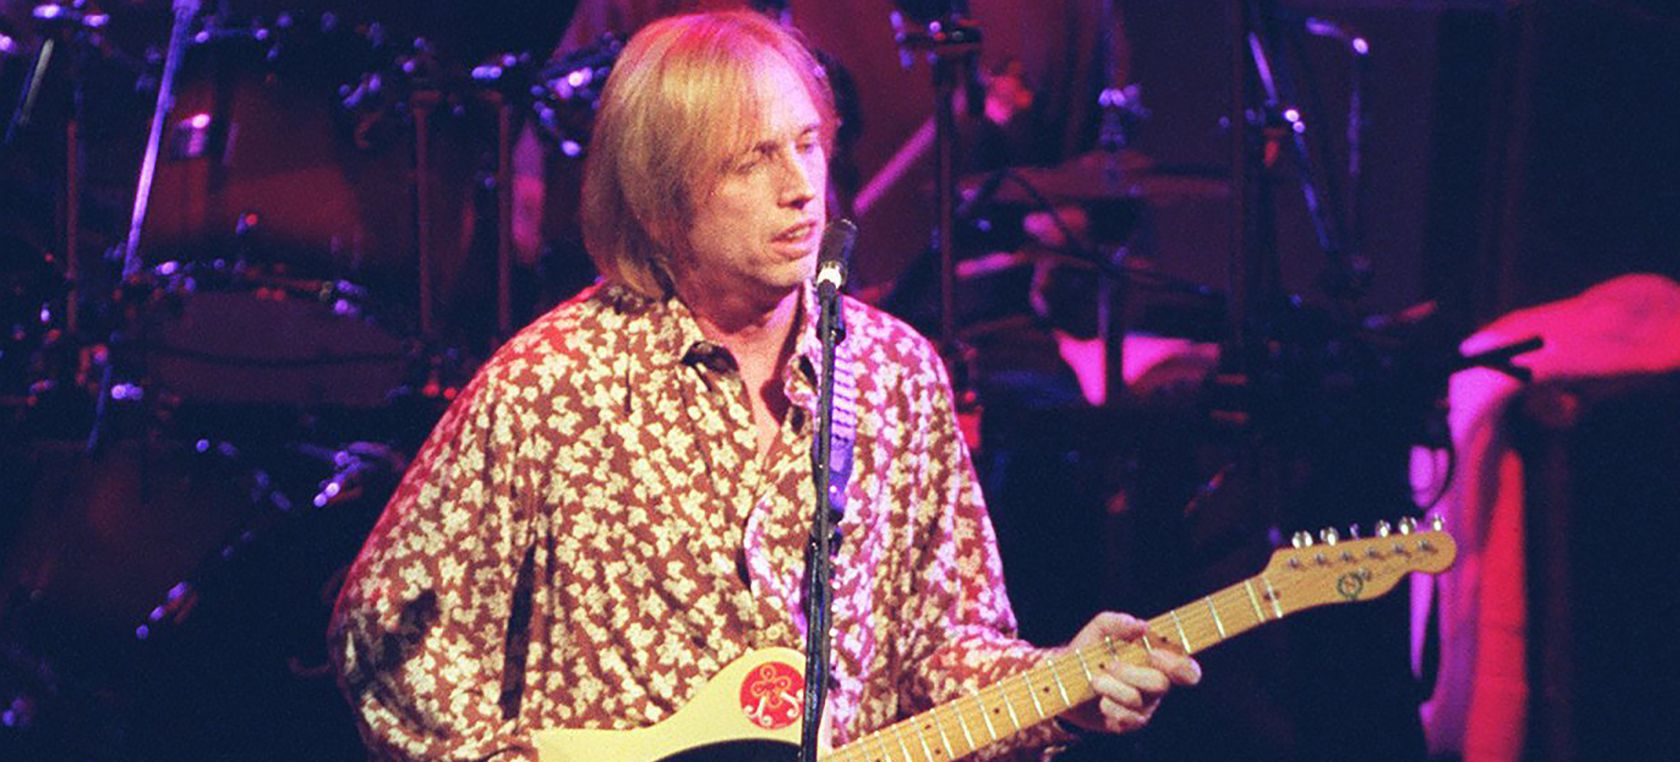 Tom Petty & The Heartbreakers publican
'Live at the Fillmore 1997'